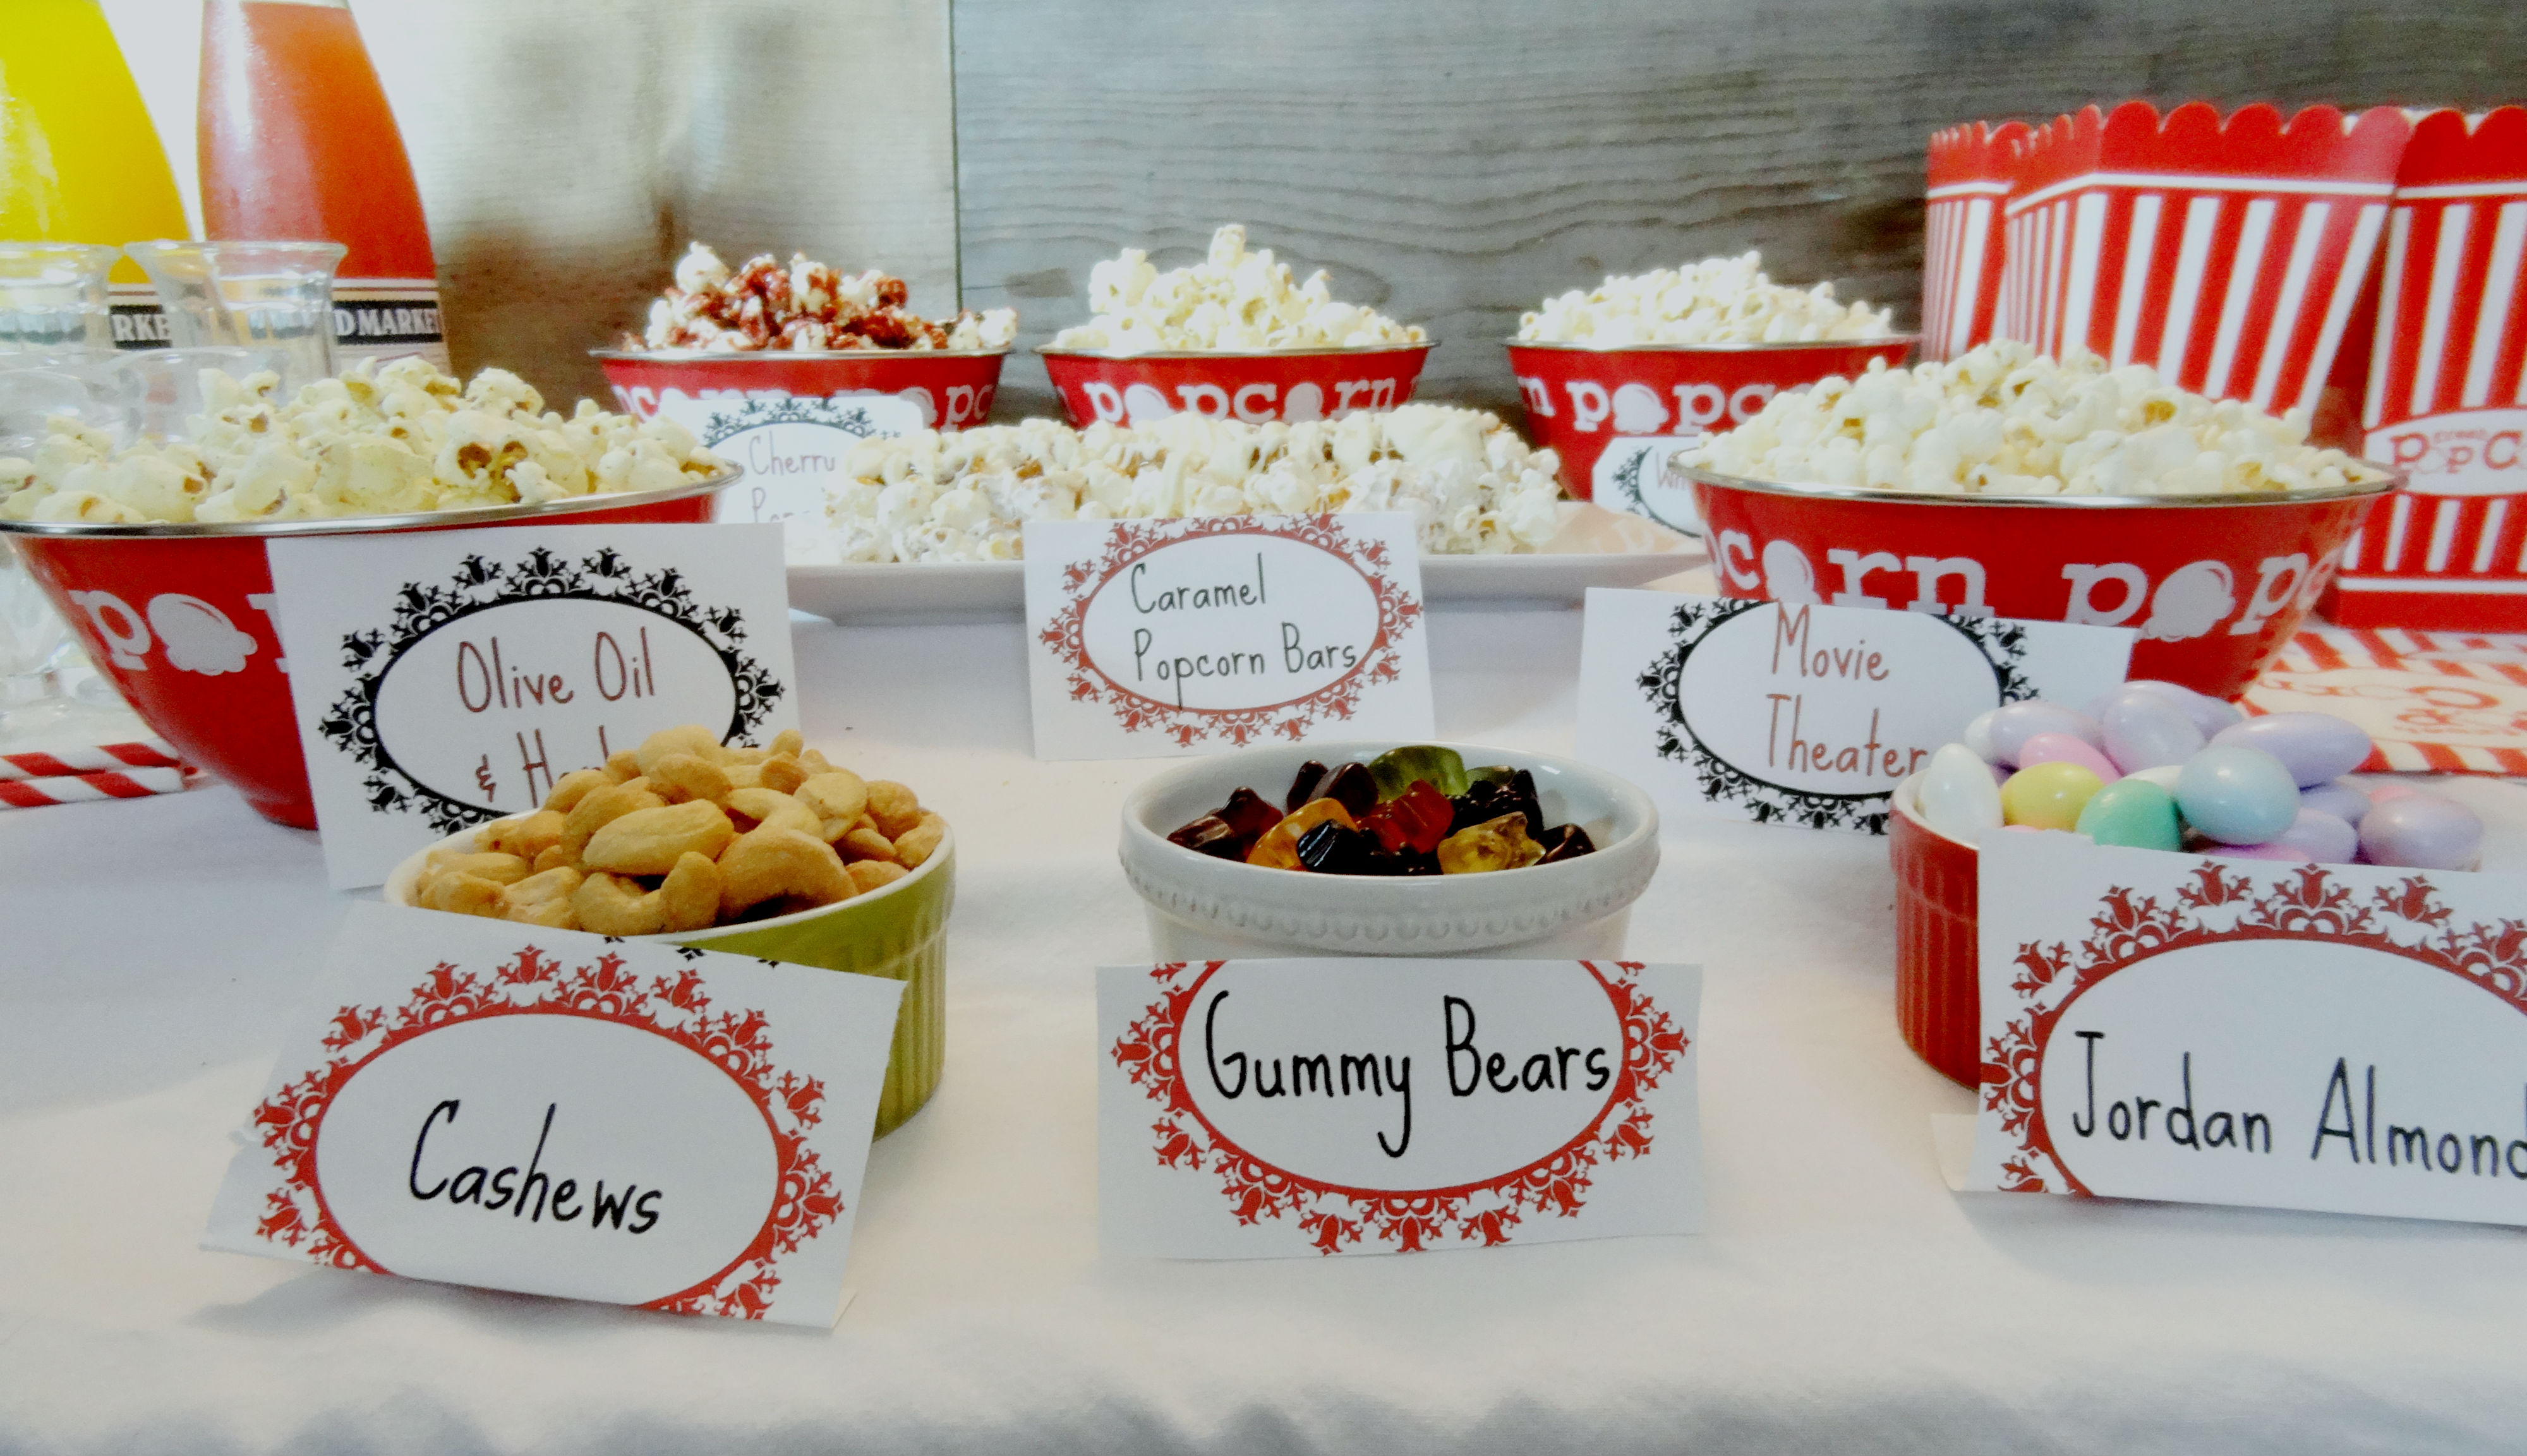 5 Fun Wedding Food Trends to Try